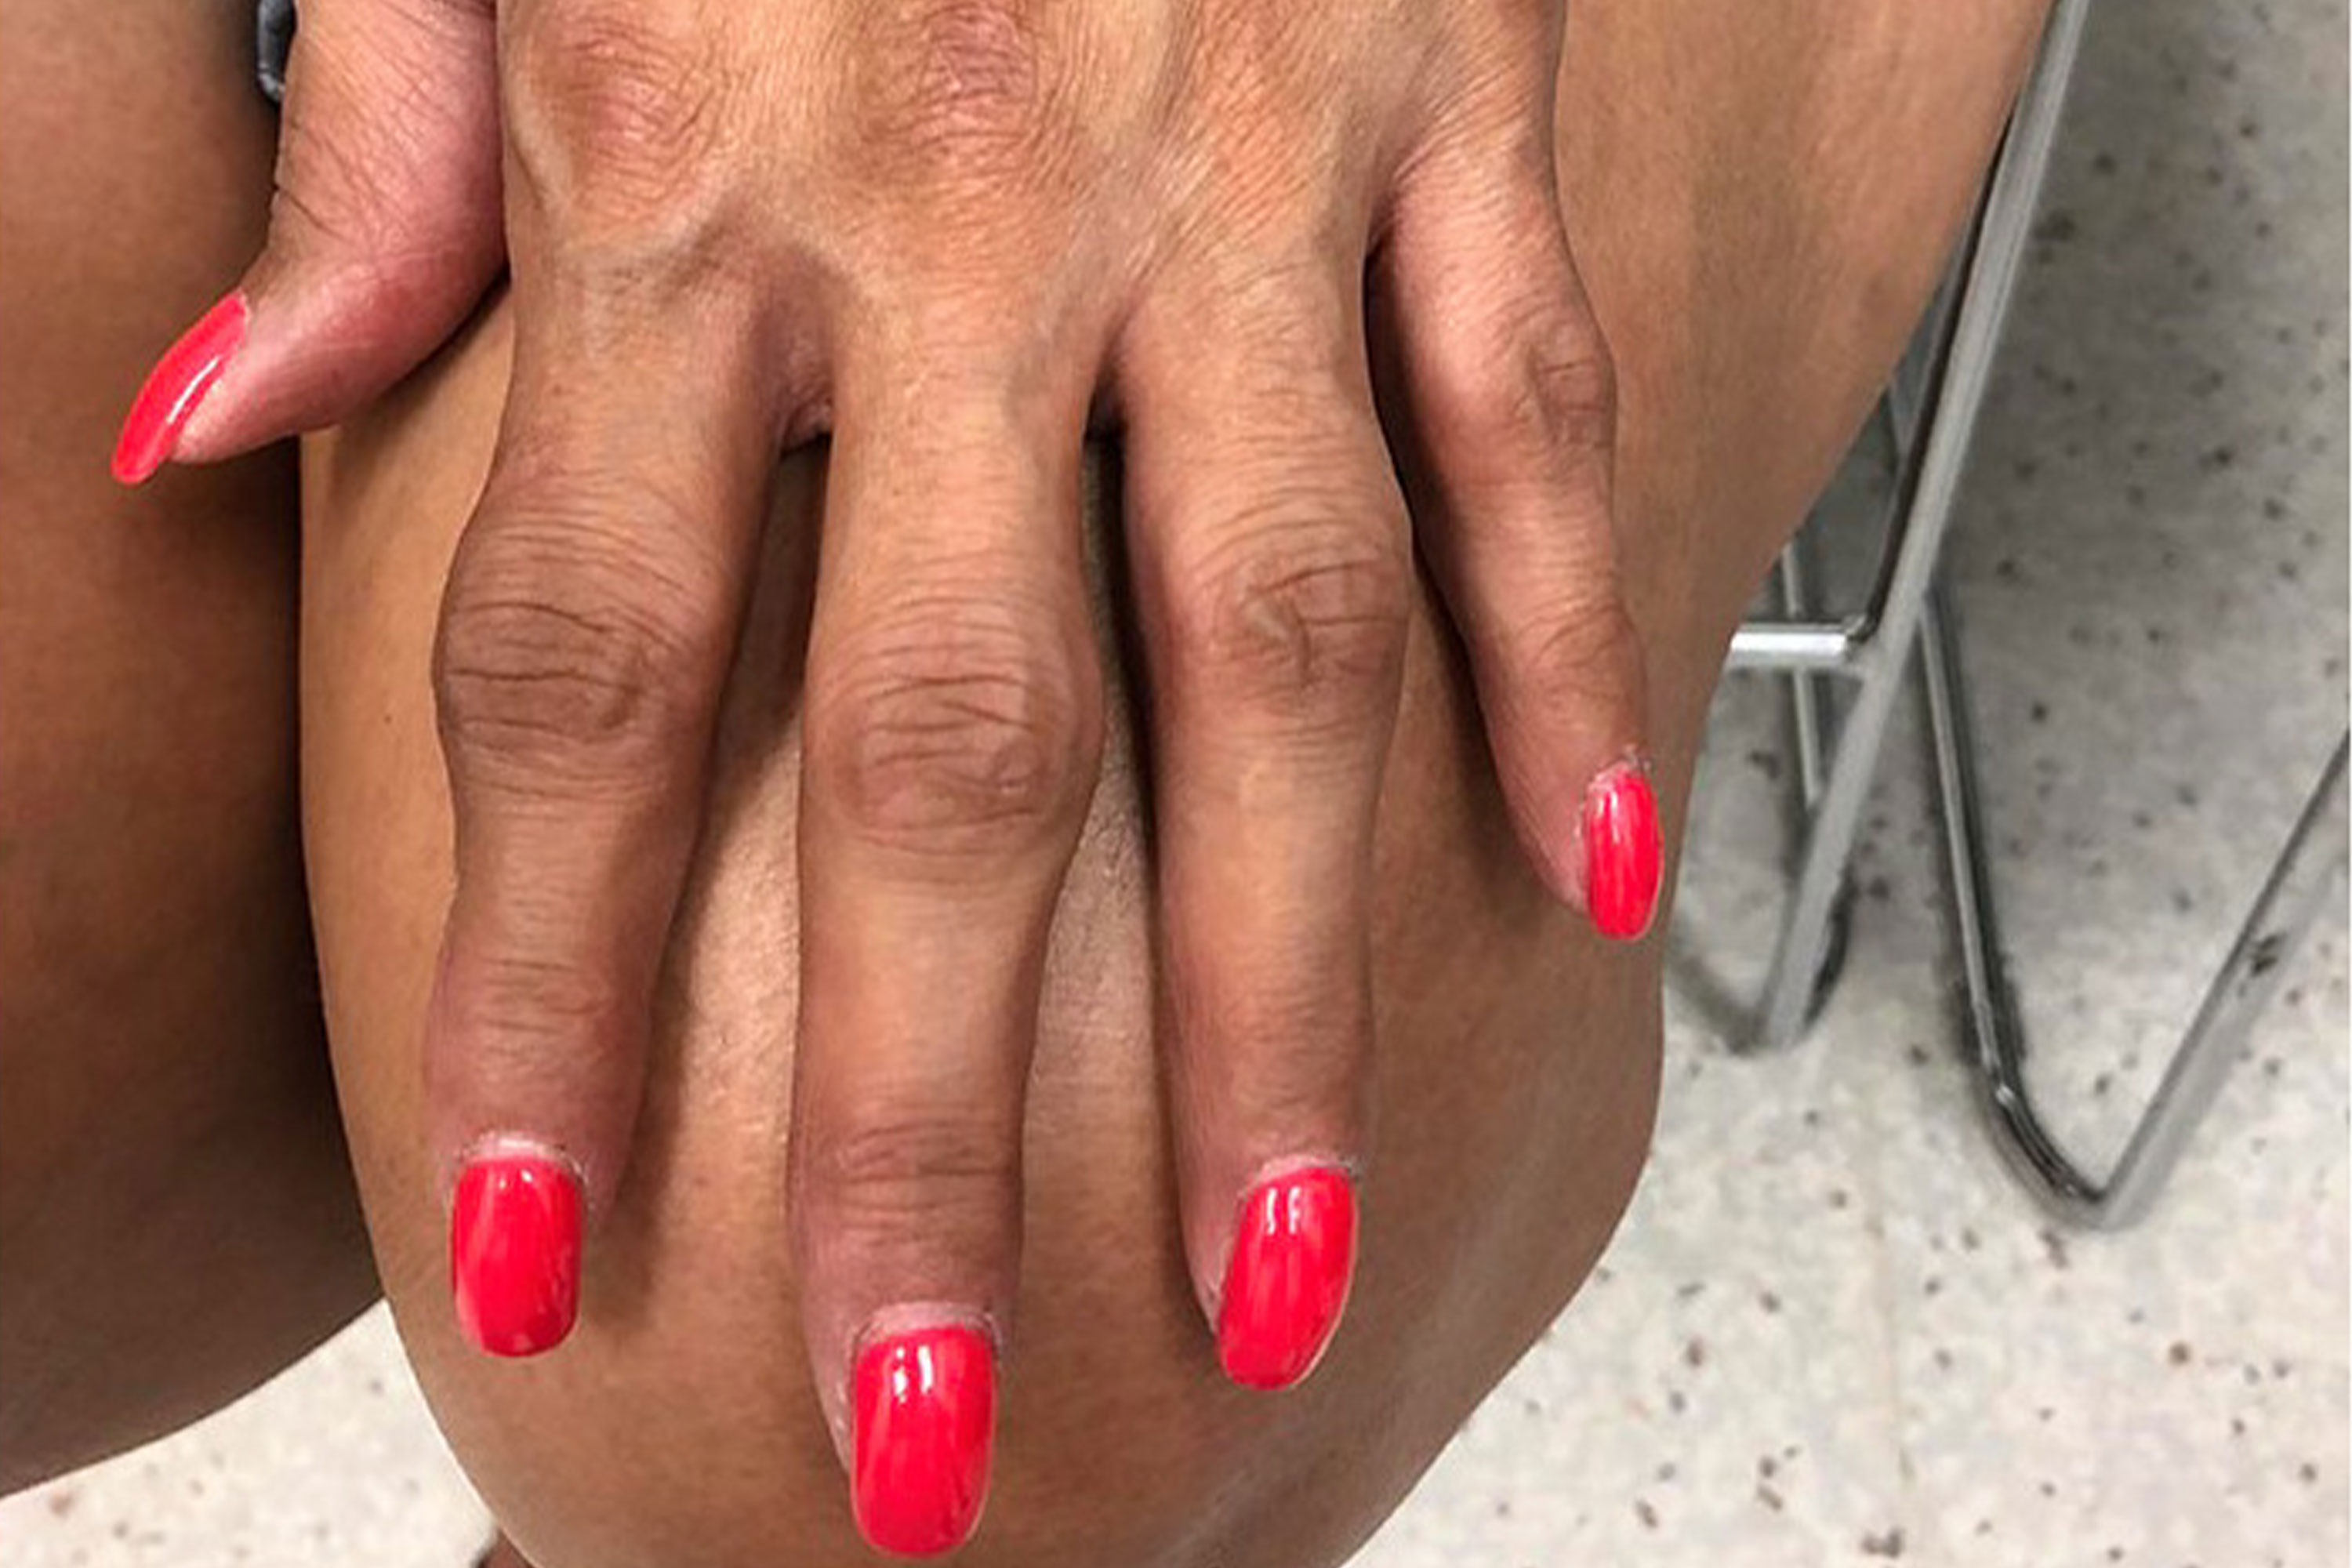 Nail pitting !! - September 2019 Babies | Forums | What to Expect